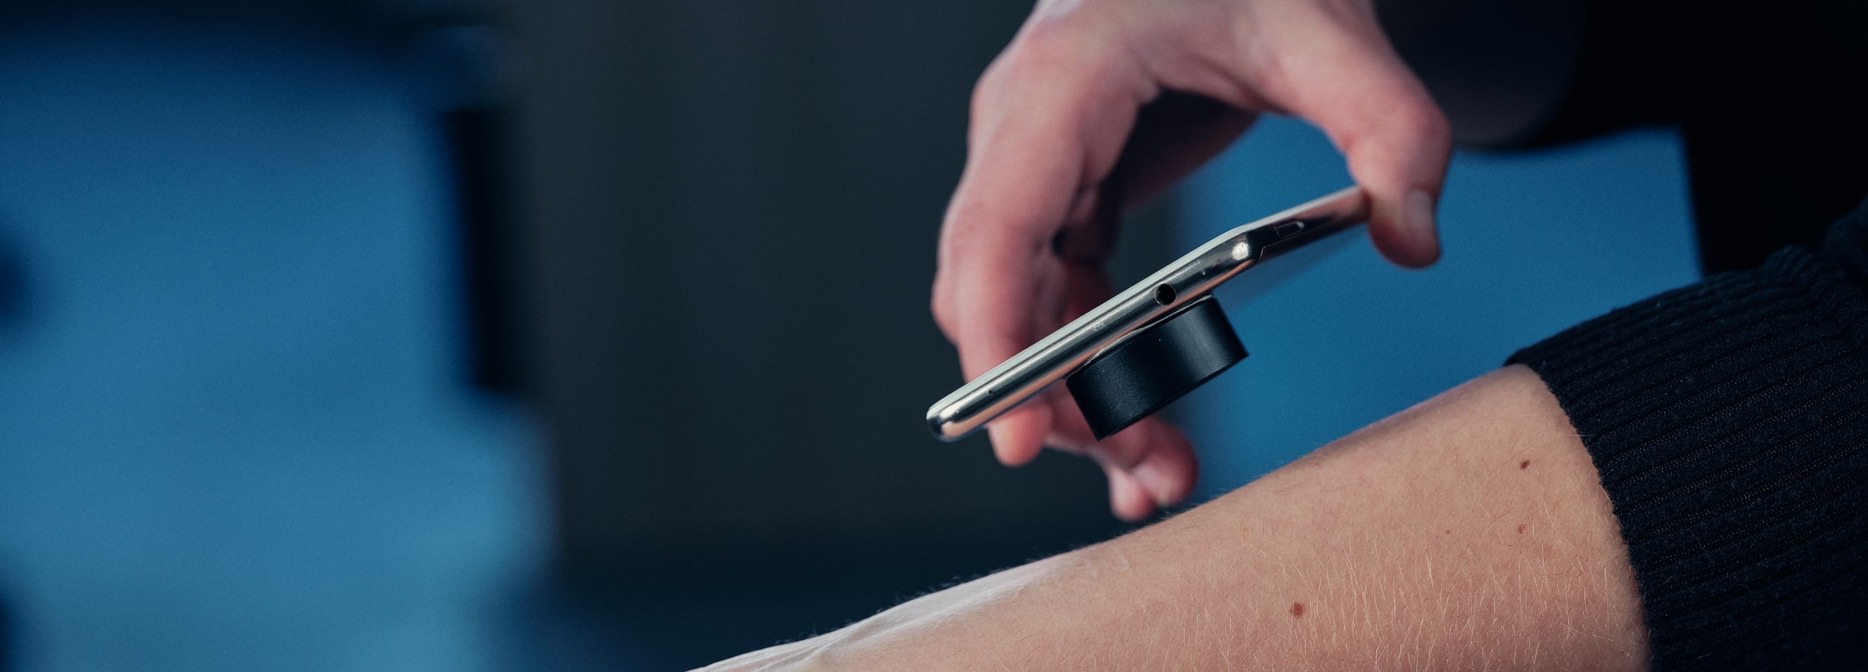 A smartphone with an attached device acts as a digital dermatoscope, helping to identify skin cancer